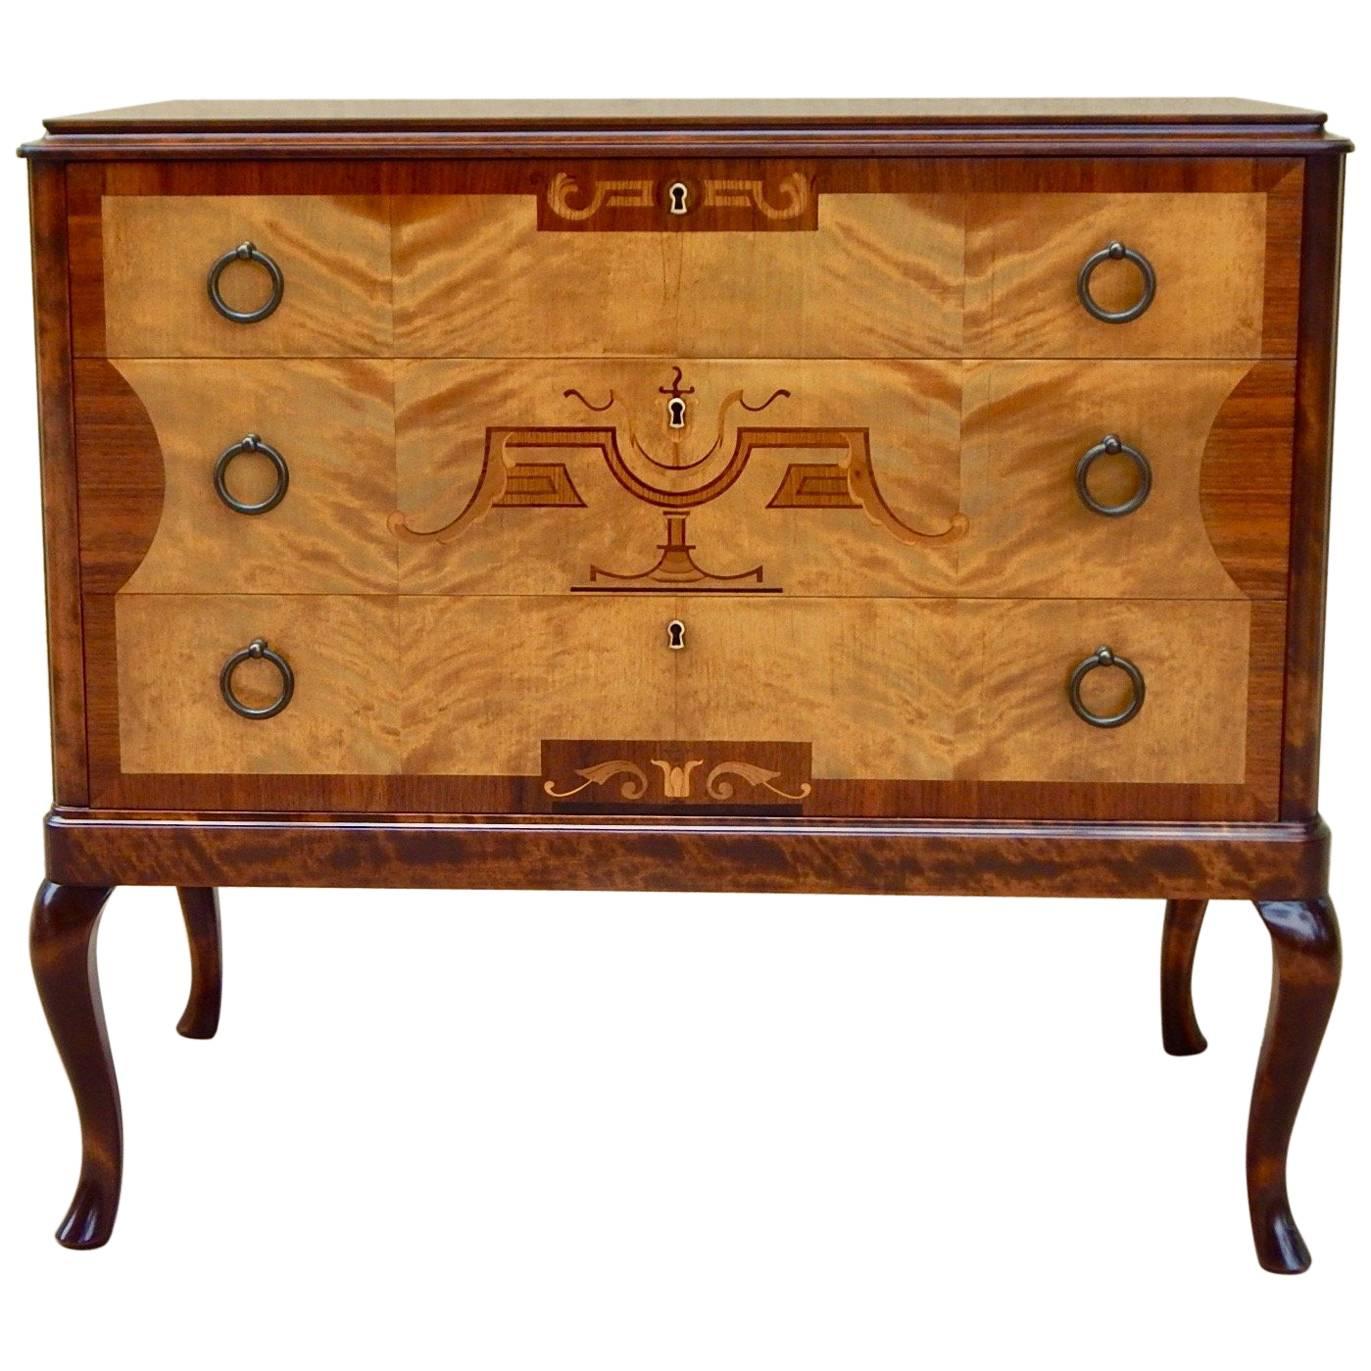 Swedish Art Deco Inlaid Chest of Drawers by Eric Chambert, Circa 1920 For Sale